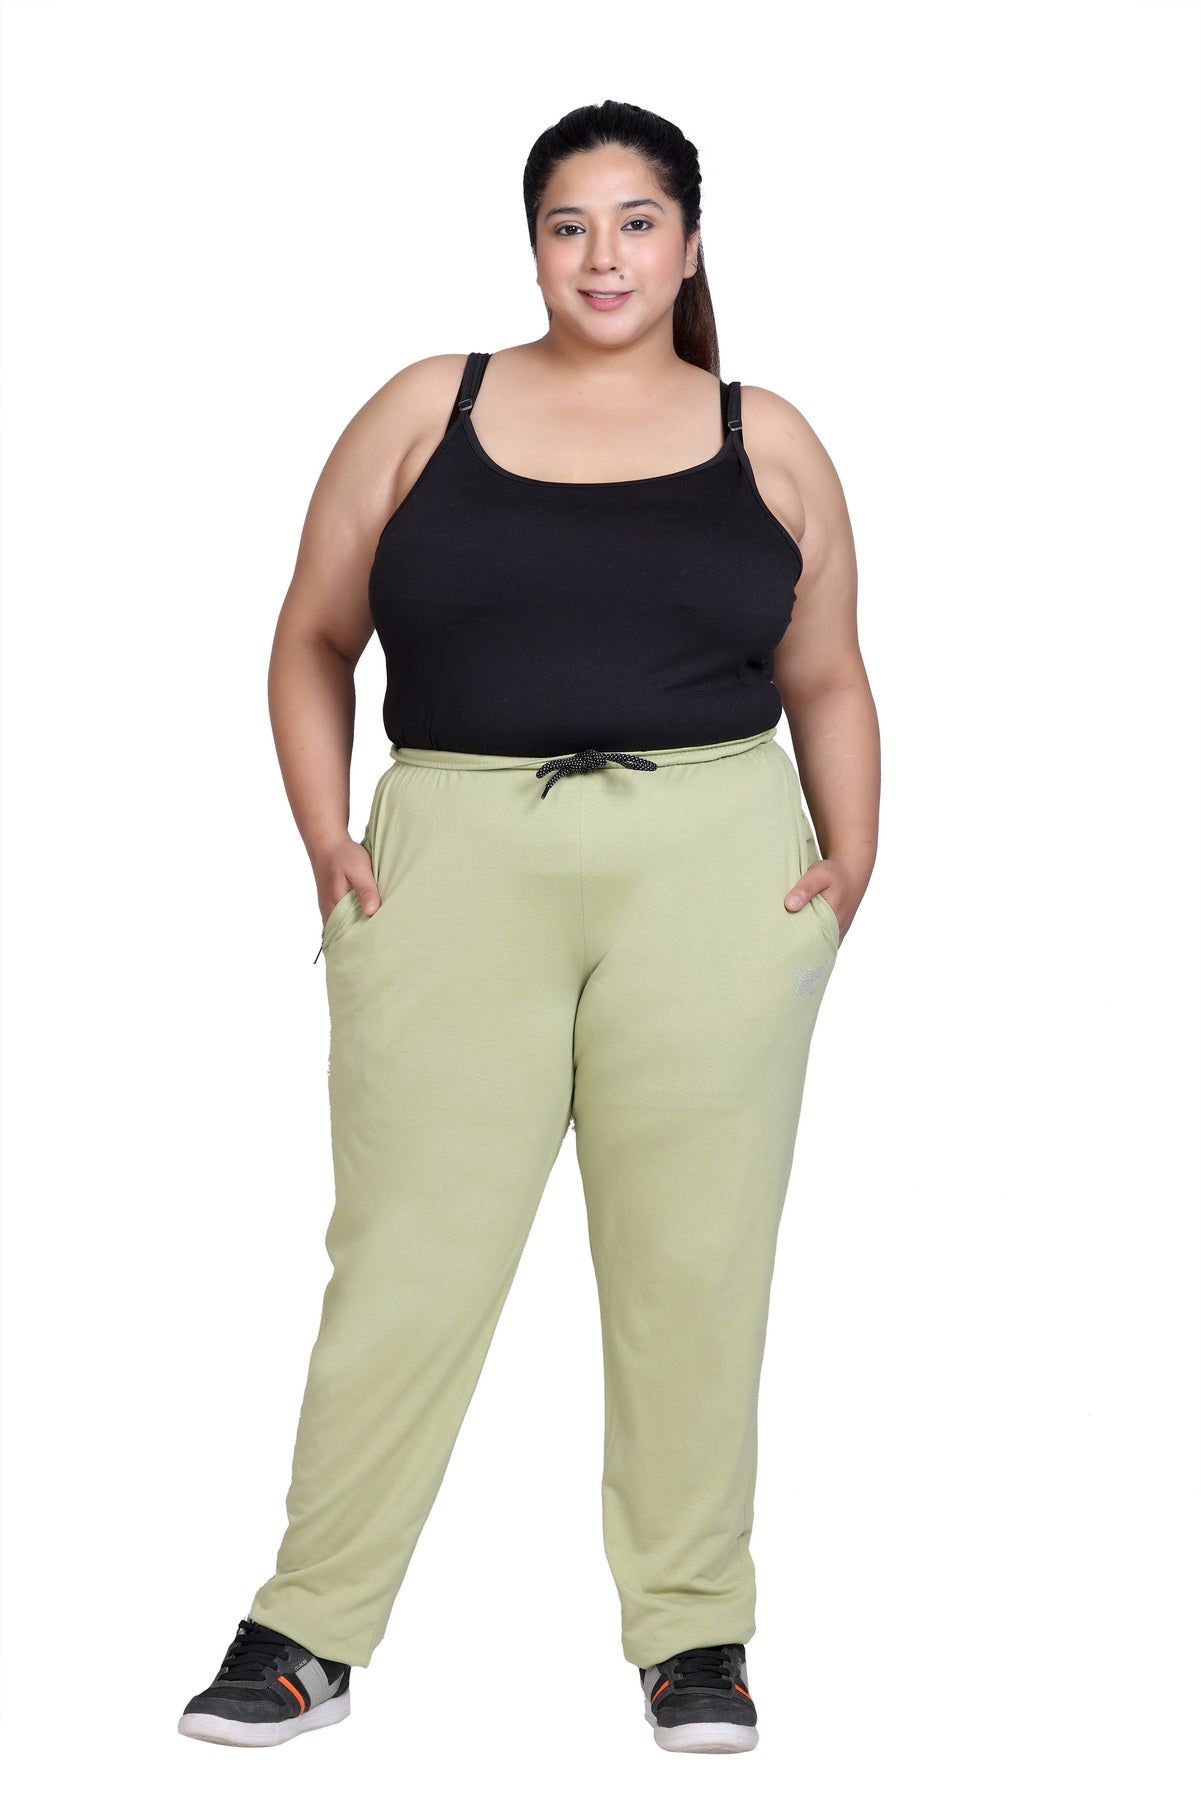 Cotton Track Pants For Women - Cardamom Green